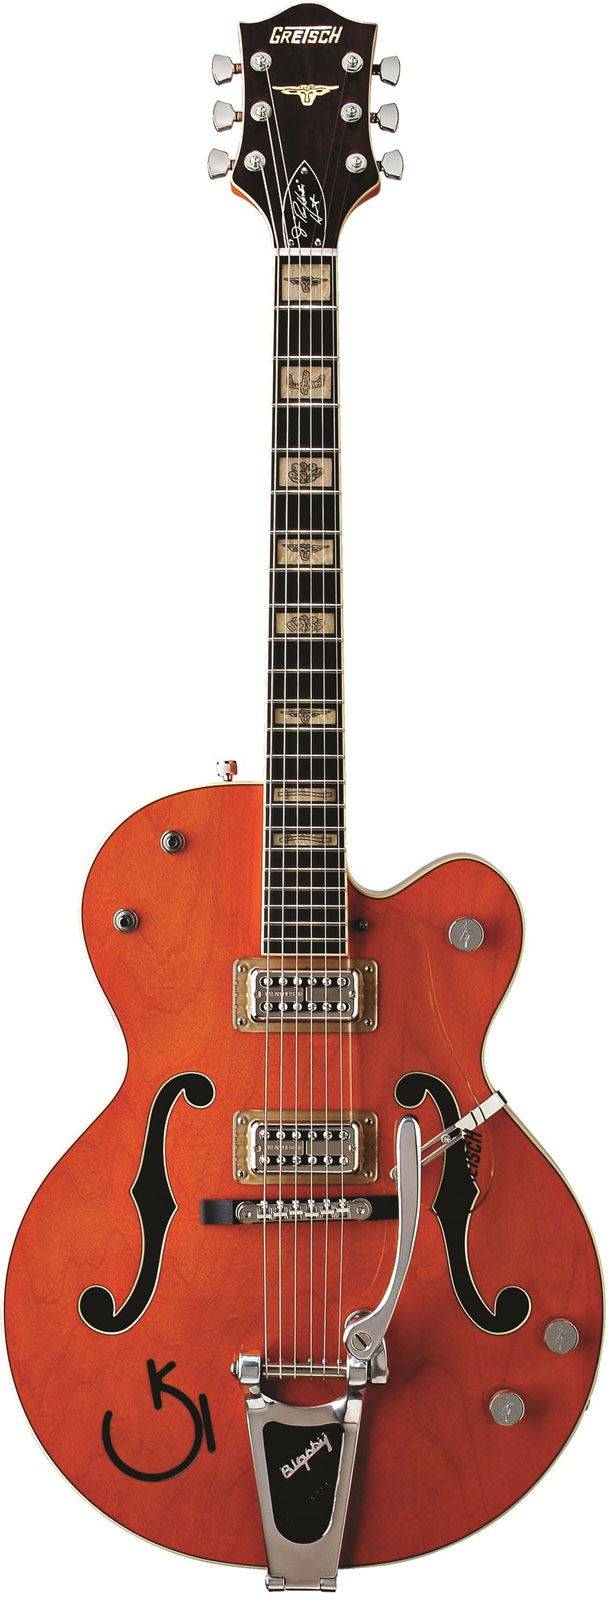 GRETSCH GUITARS G6120RHH REVEREND HORTON HEAT SIGNATURE HOLLOW BODY WITH BIGSBY EBO, ORANGE STAIN, LACQUER